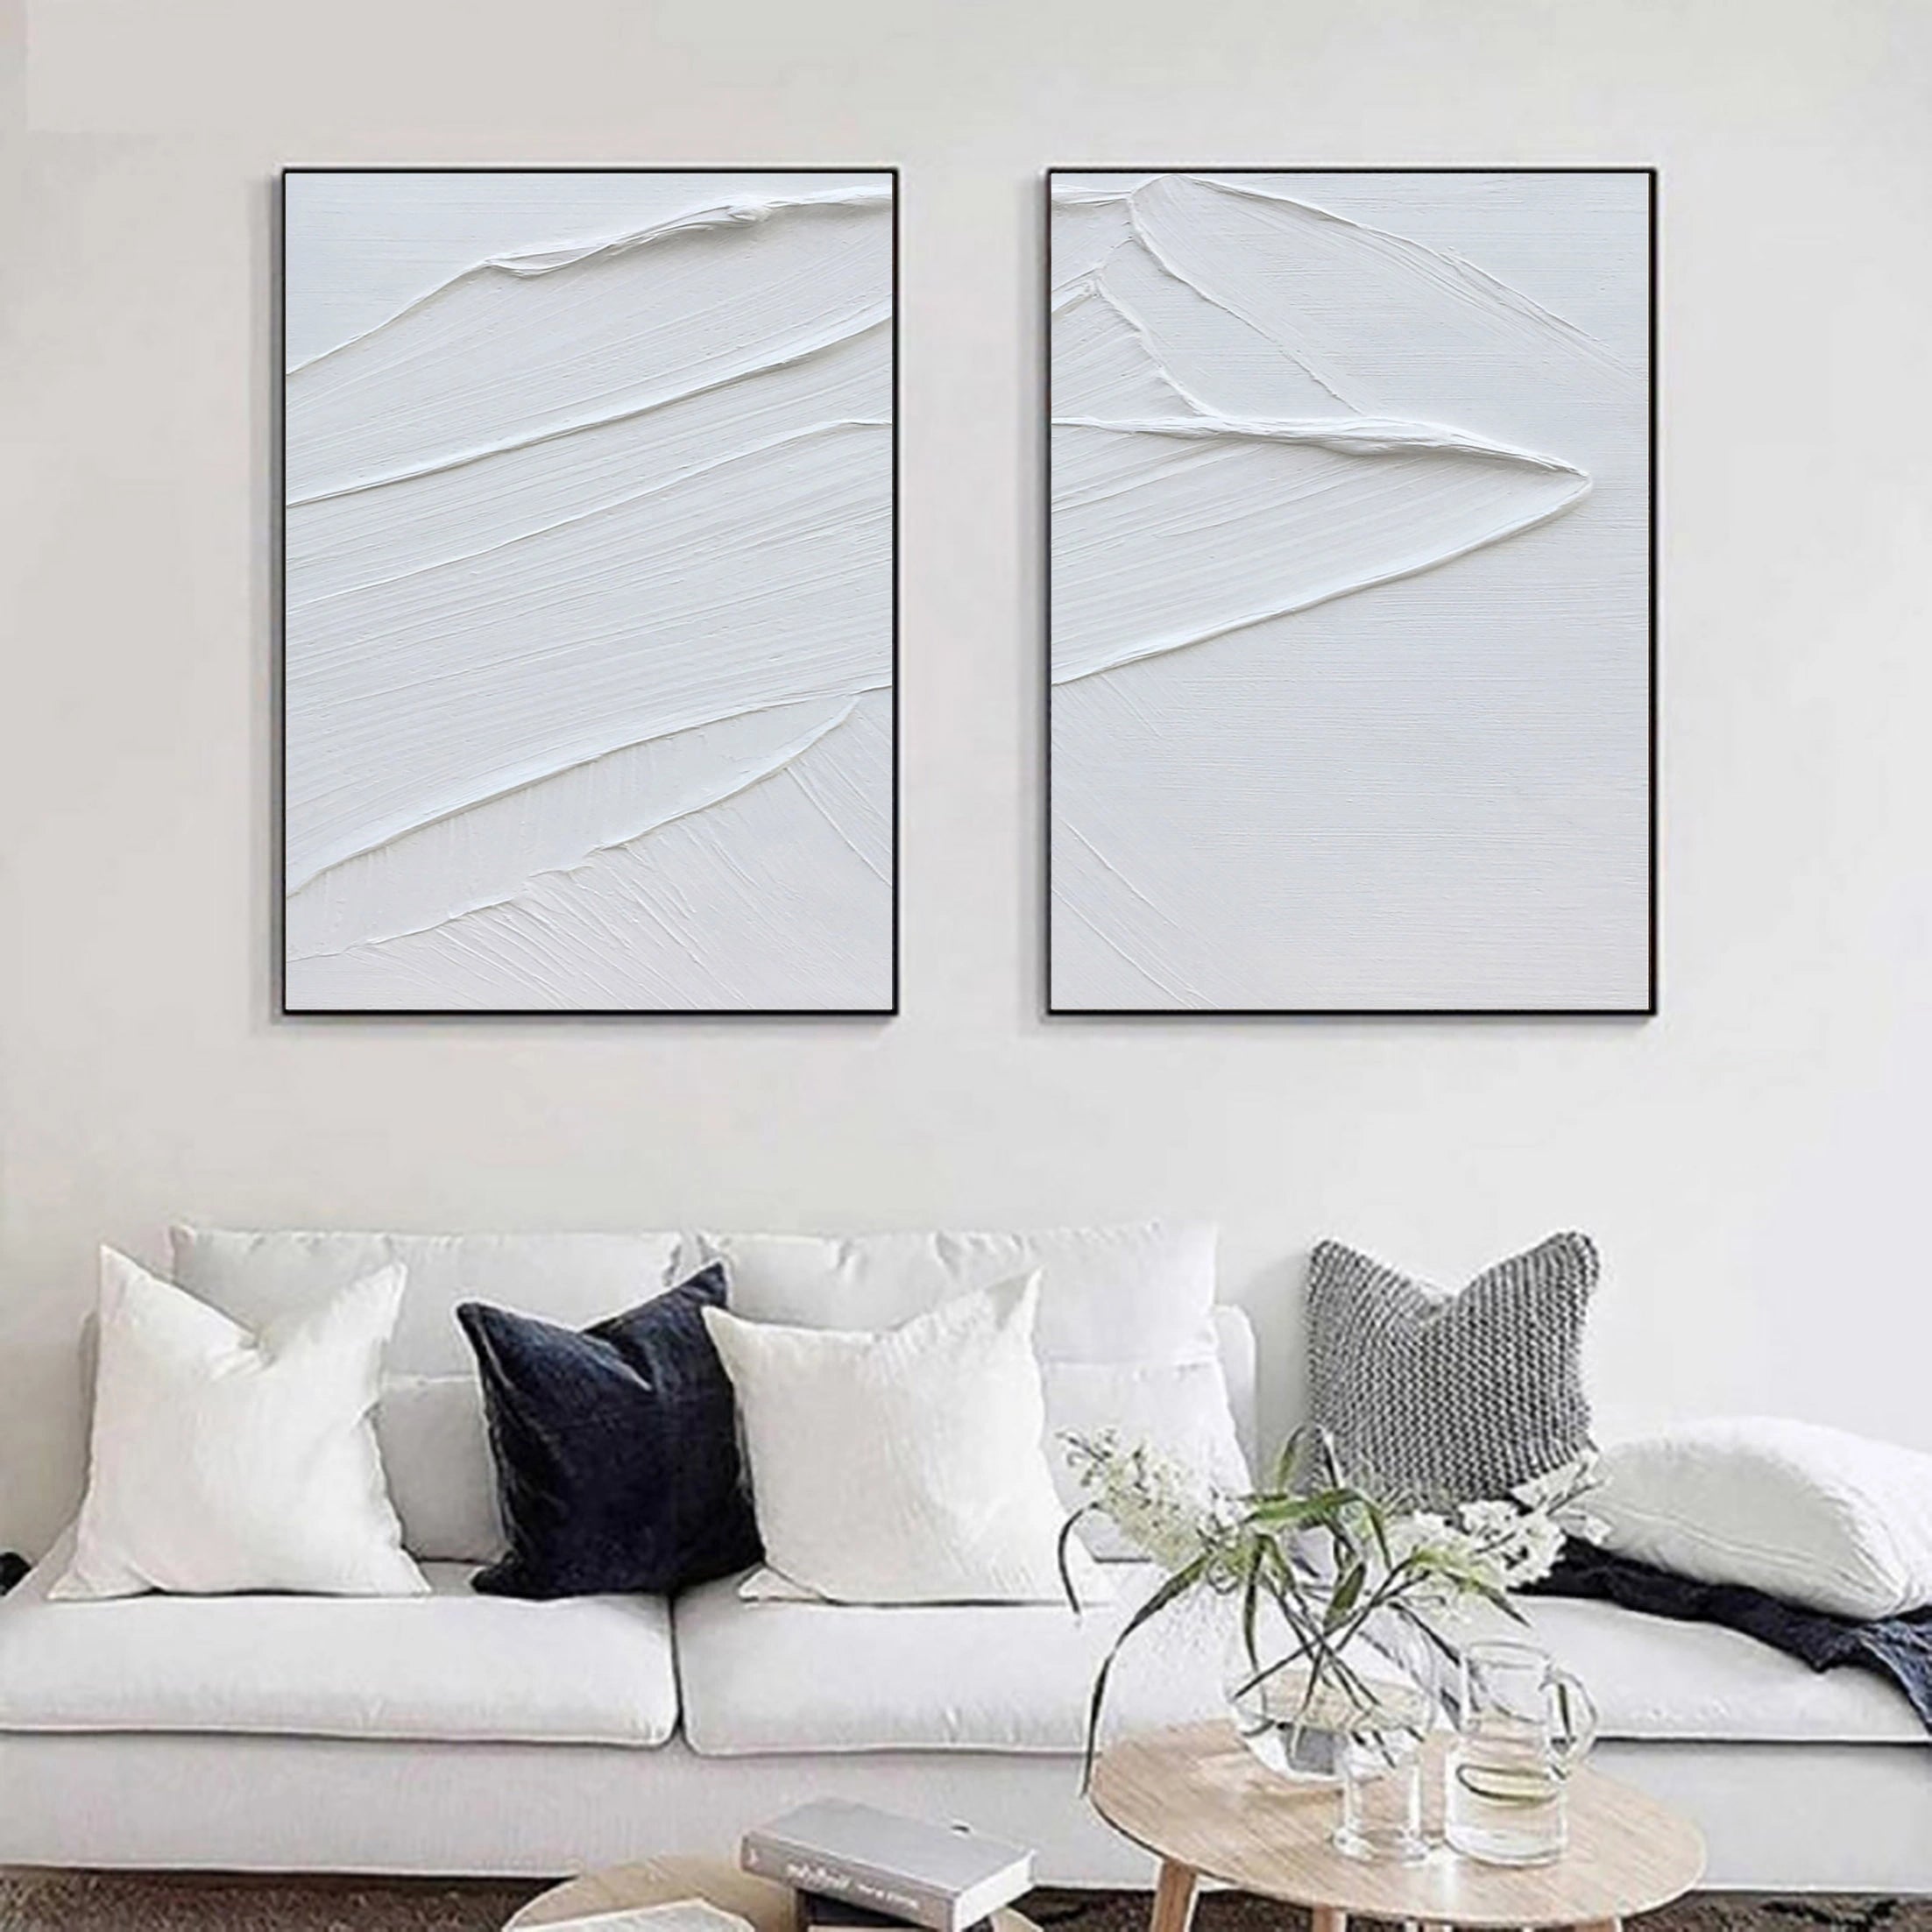 Set of 2 Plaster Art Minimalistic Painting Wall Decor for Room